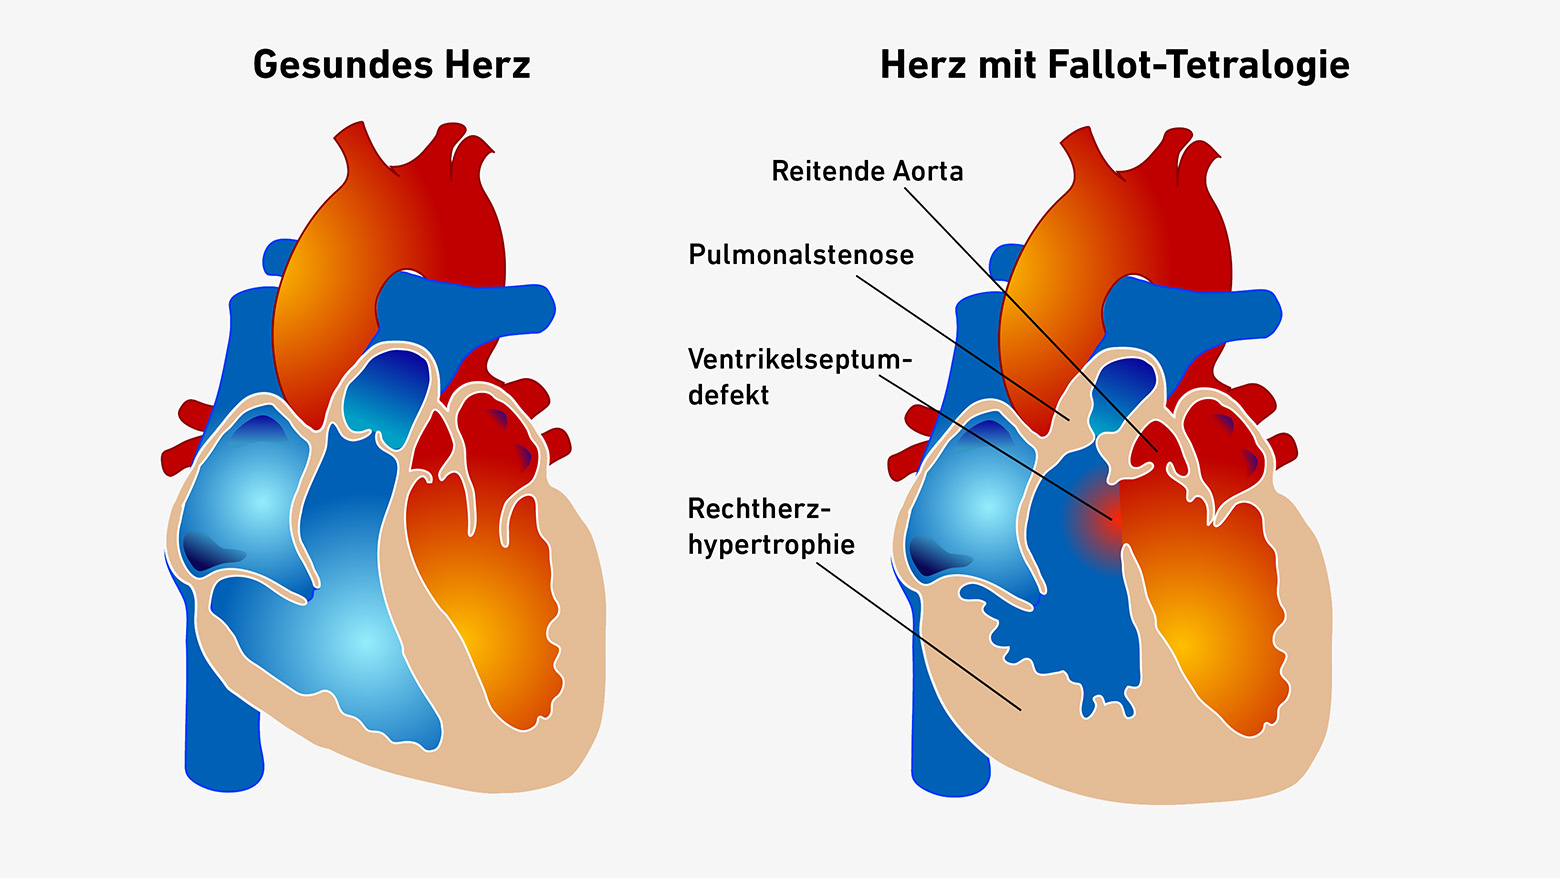 Schematic representation of a healthy heart next to a heart with tetralogy of Fallot, in which the dividing wall between the two heart chambers has a hole.